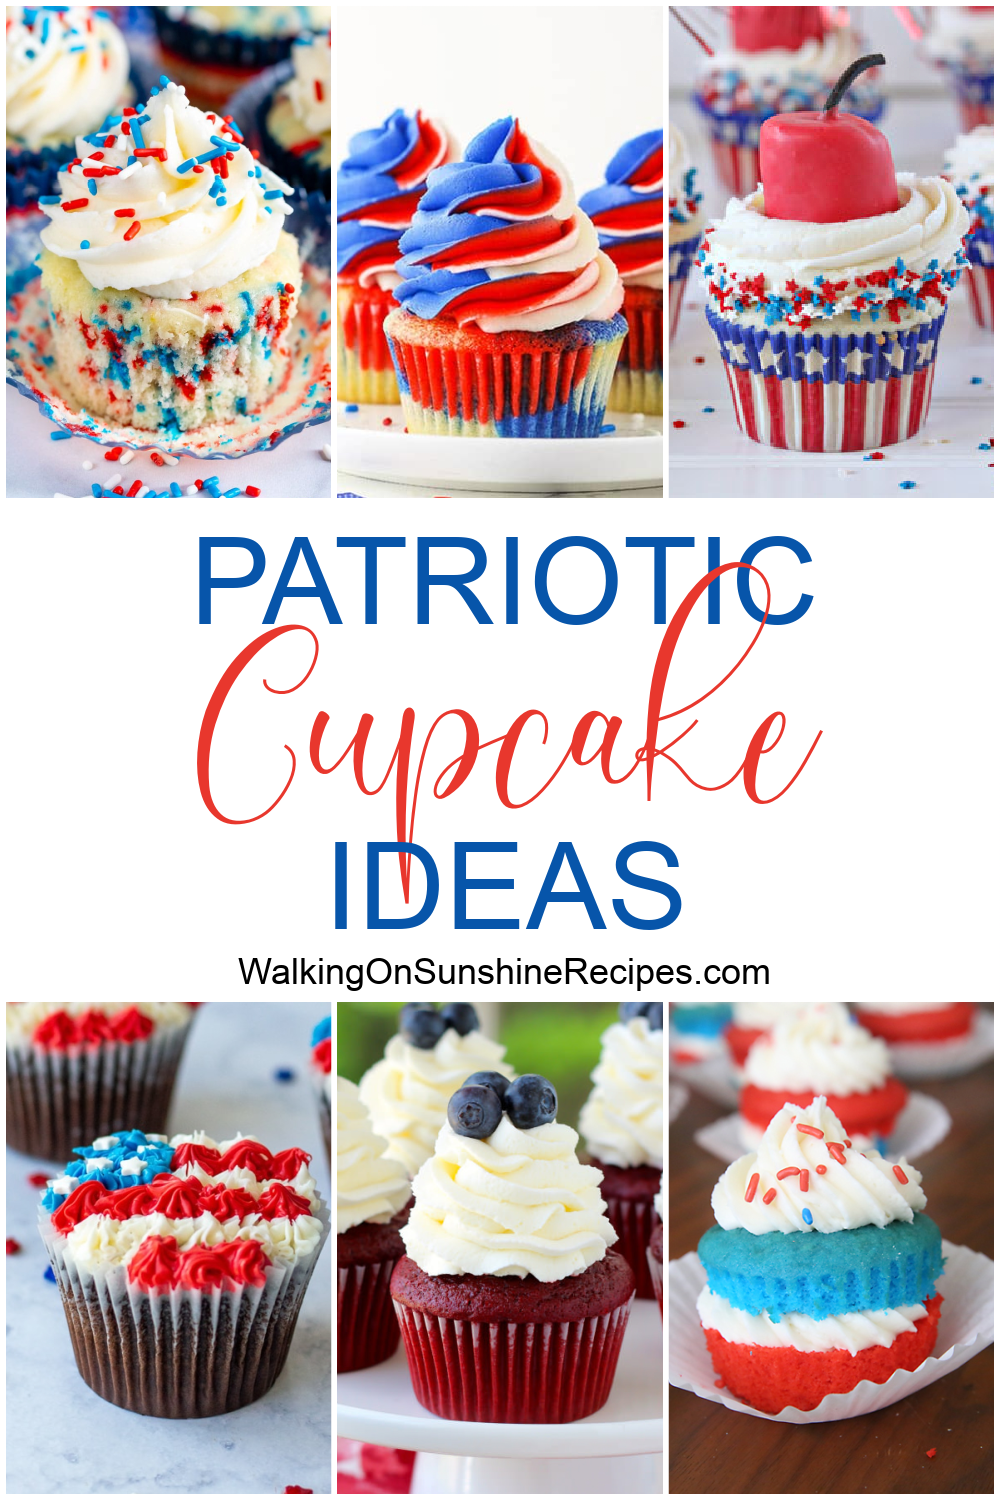 How to make 4th of July Cupcakes.